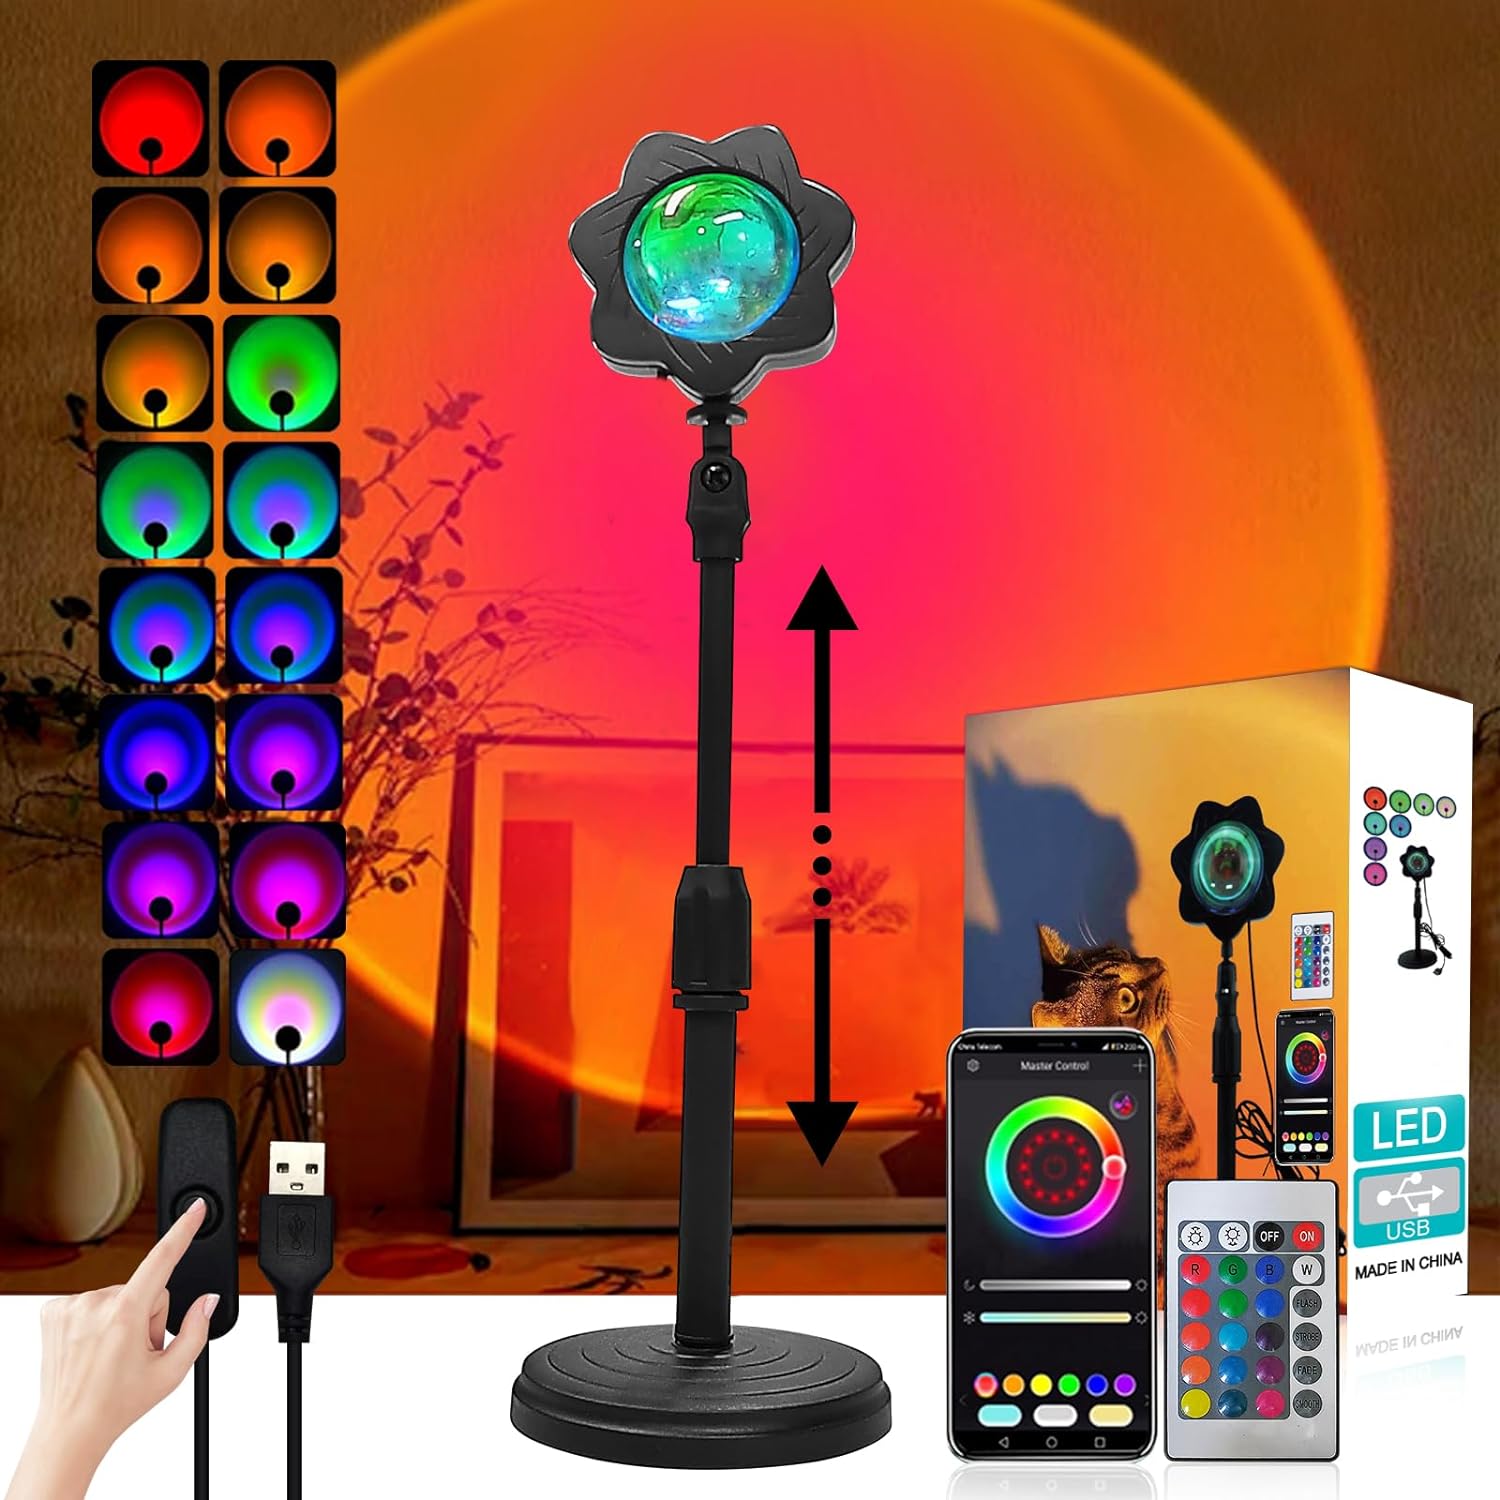 Sunset Lamp Projector LED Lights APP Remote, Sunset Light 16 Colors Night Light LED Floor Lamp Mood Lights for Photography/Selfie/Party/Home/Room/Bedroom Decor, Gift for Halloween, Christmas